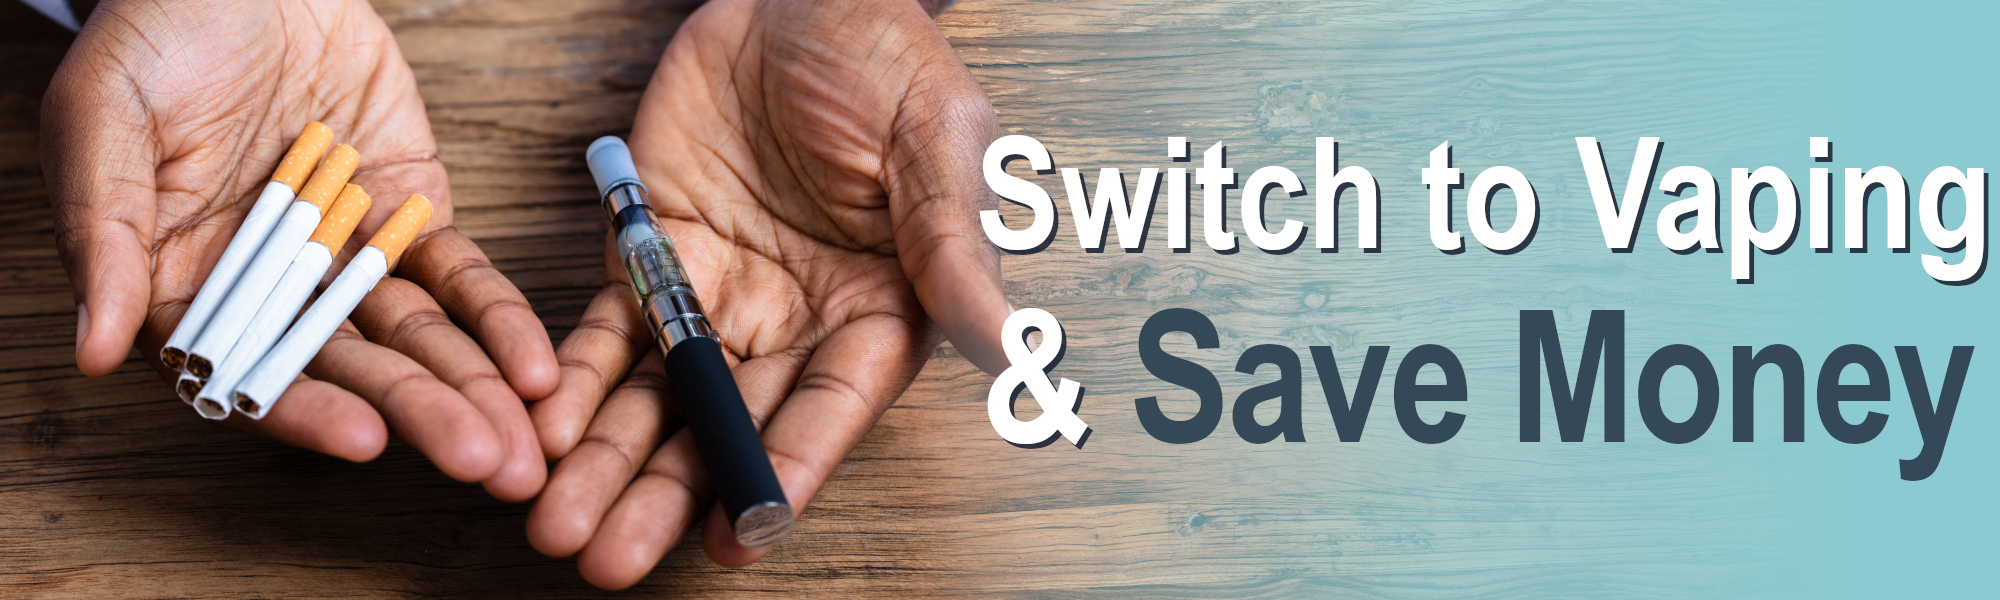 save money with vaping, save money, stop smoking and save money